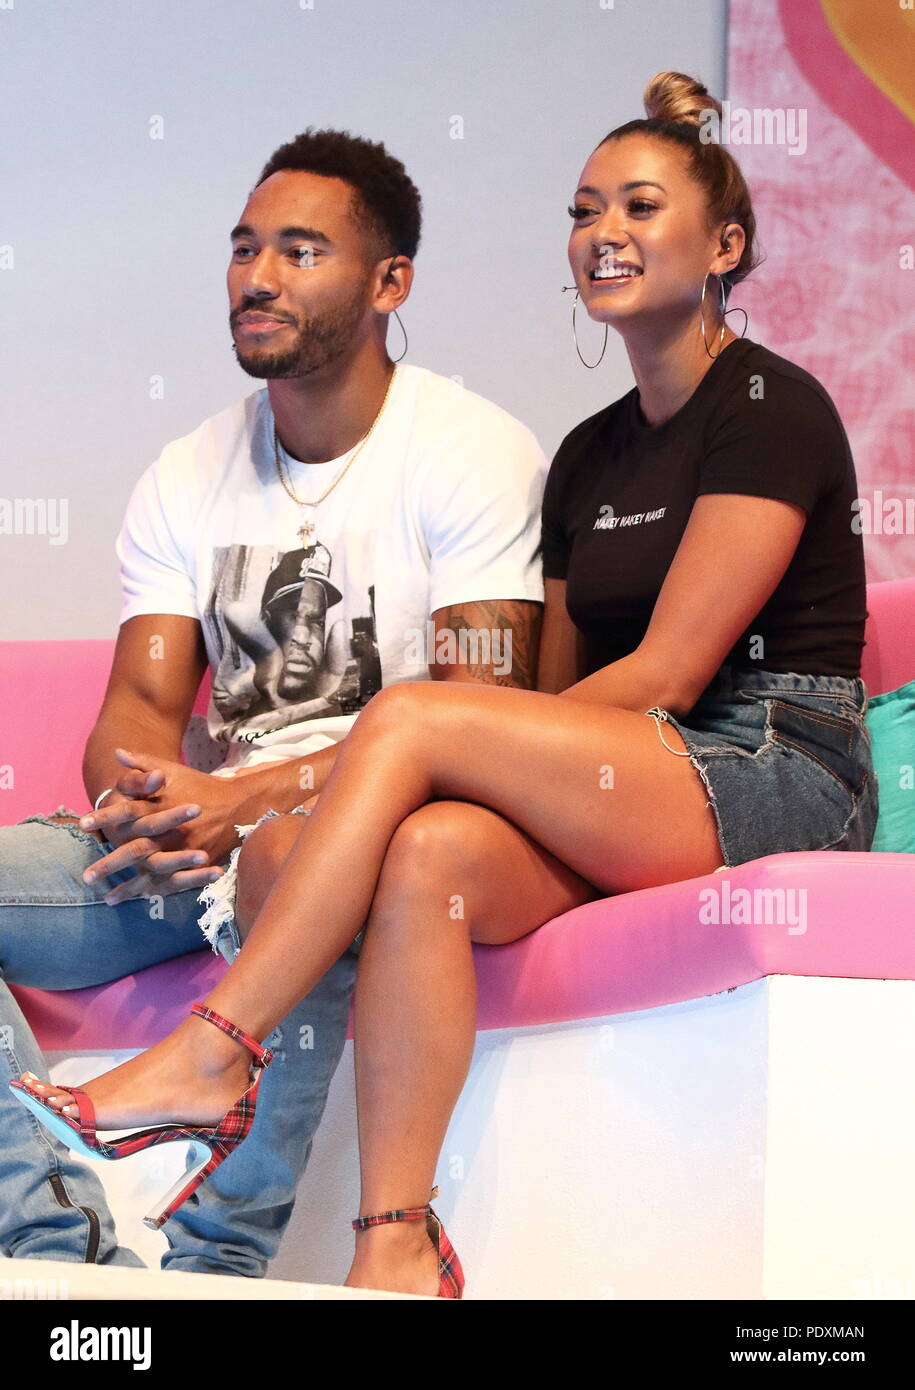 London, UK, 10 Aug 2018. Josh Denzel and Kaz Crossley at Love Island Live  at the